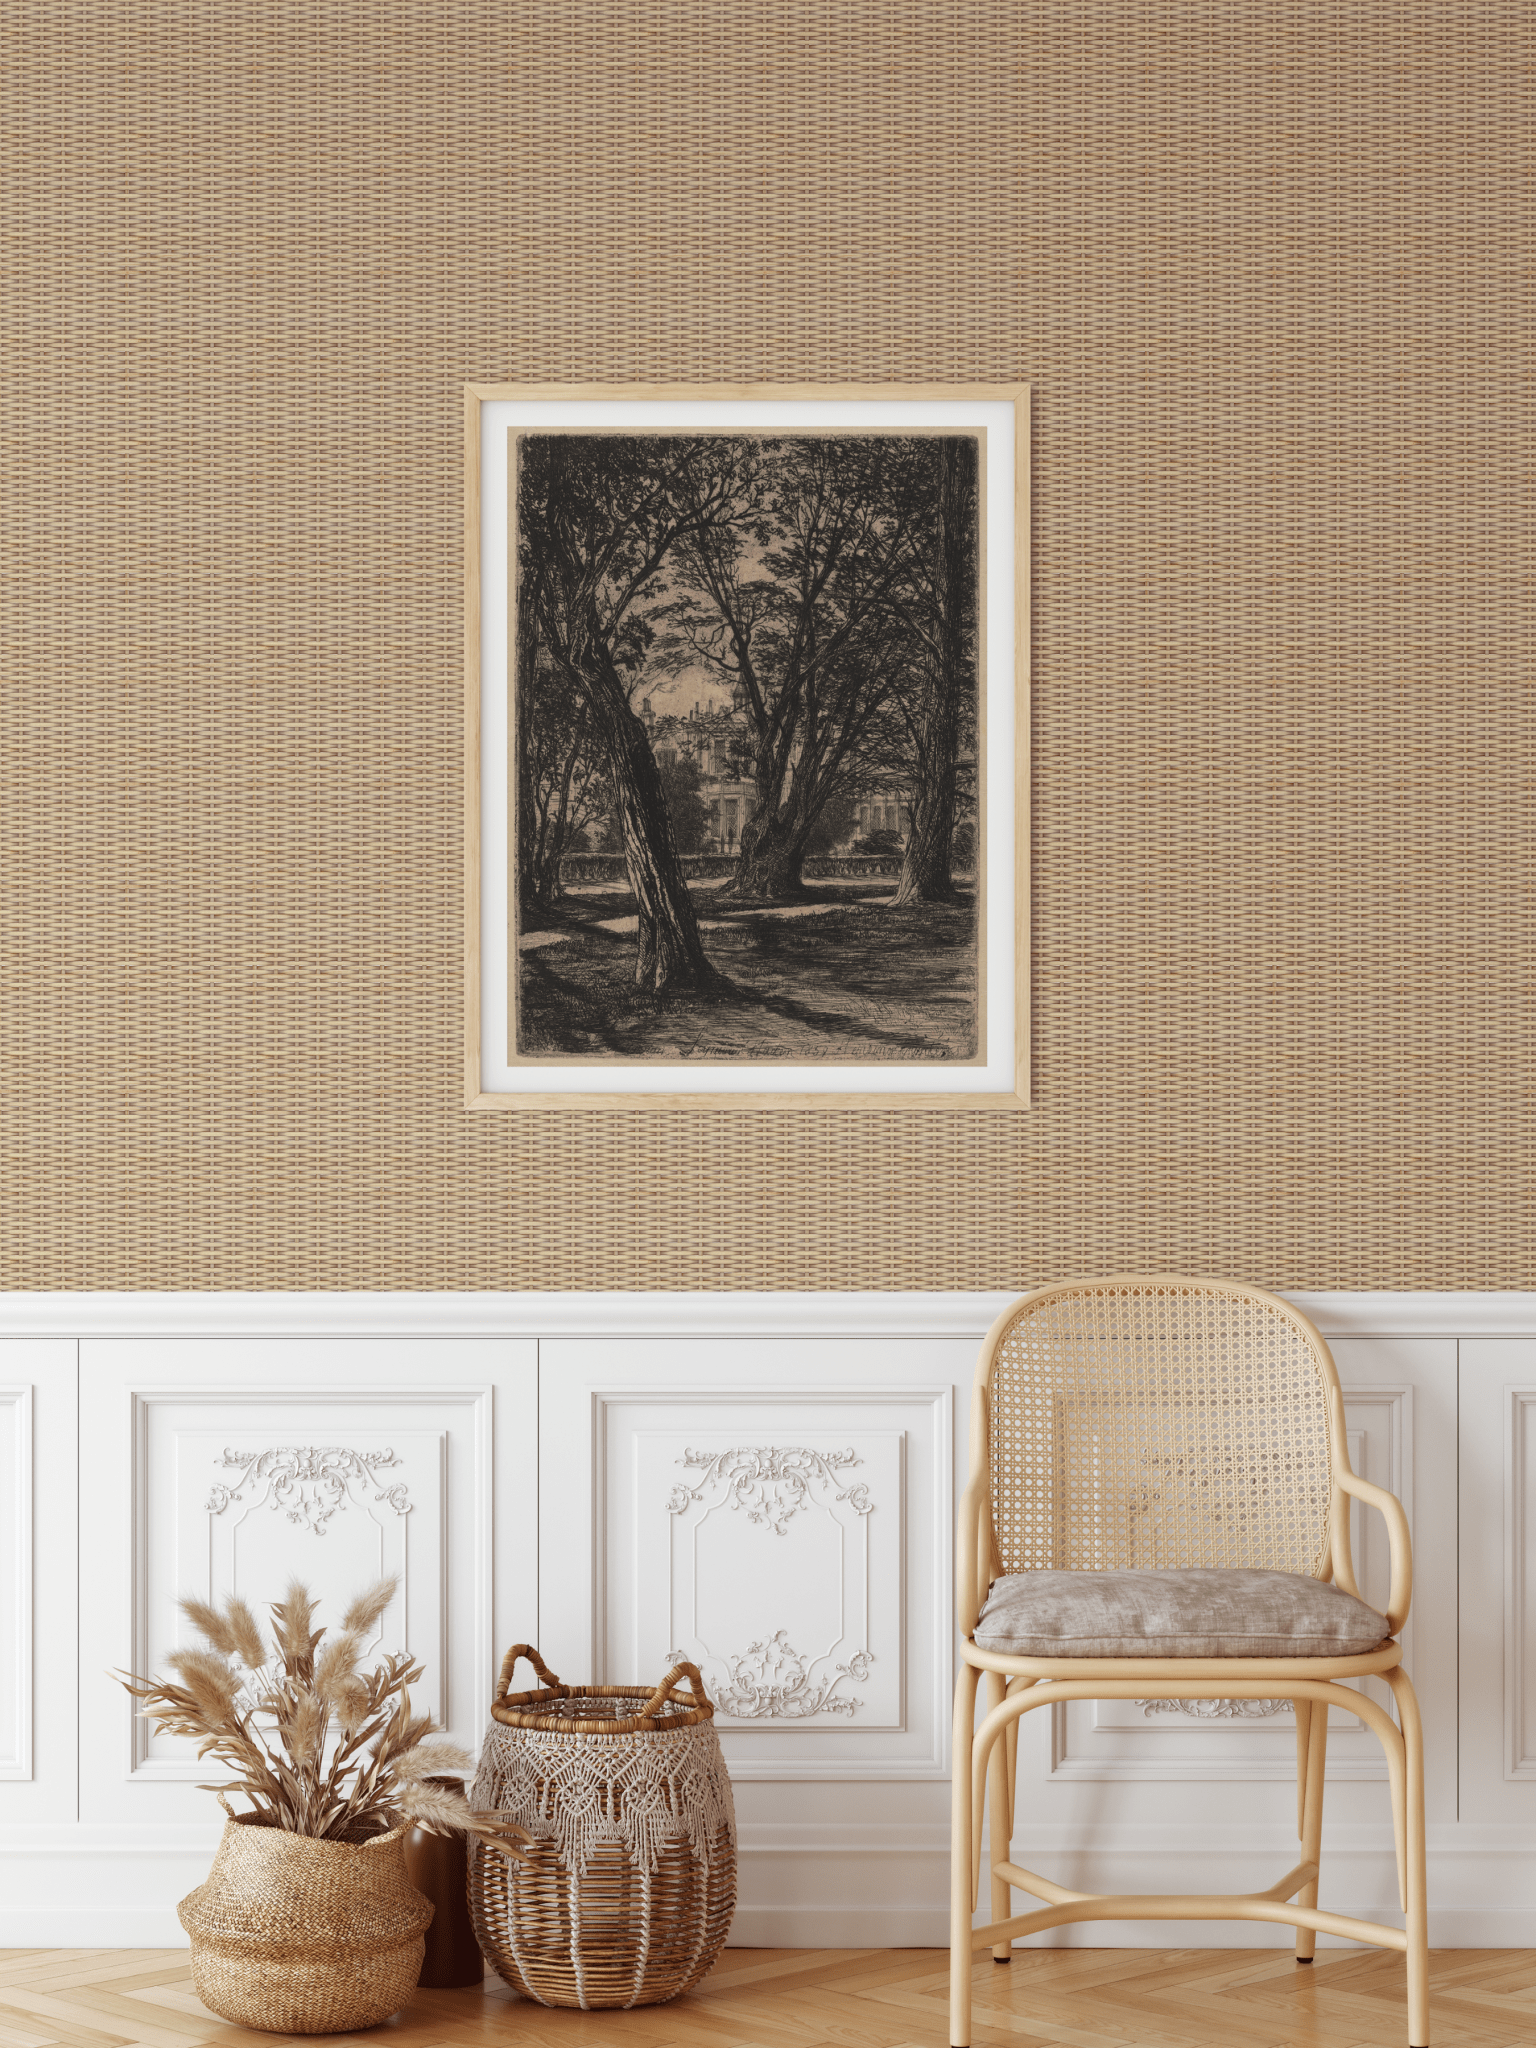 A sophisticated room featuring natural rattan weave wallpaper, a classic wooden chair with rattan detailing, a framed vintage landscape print on the wall, and decorative wicker baskets with pampas grass.